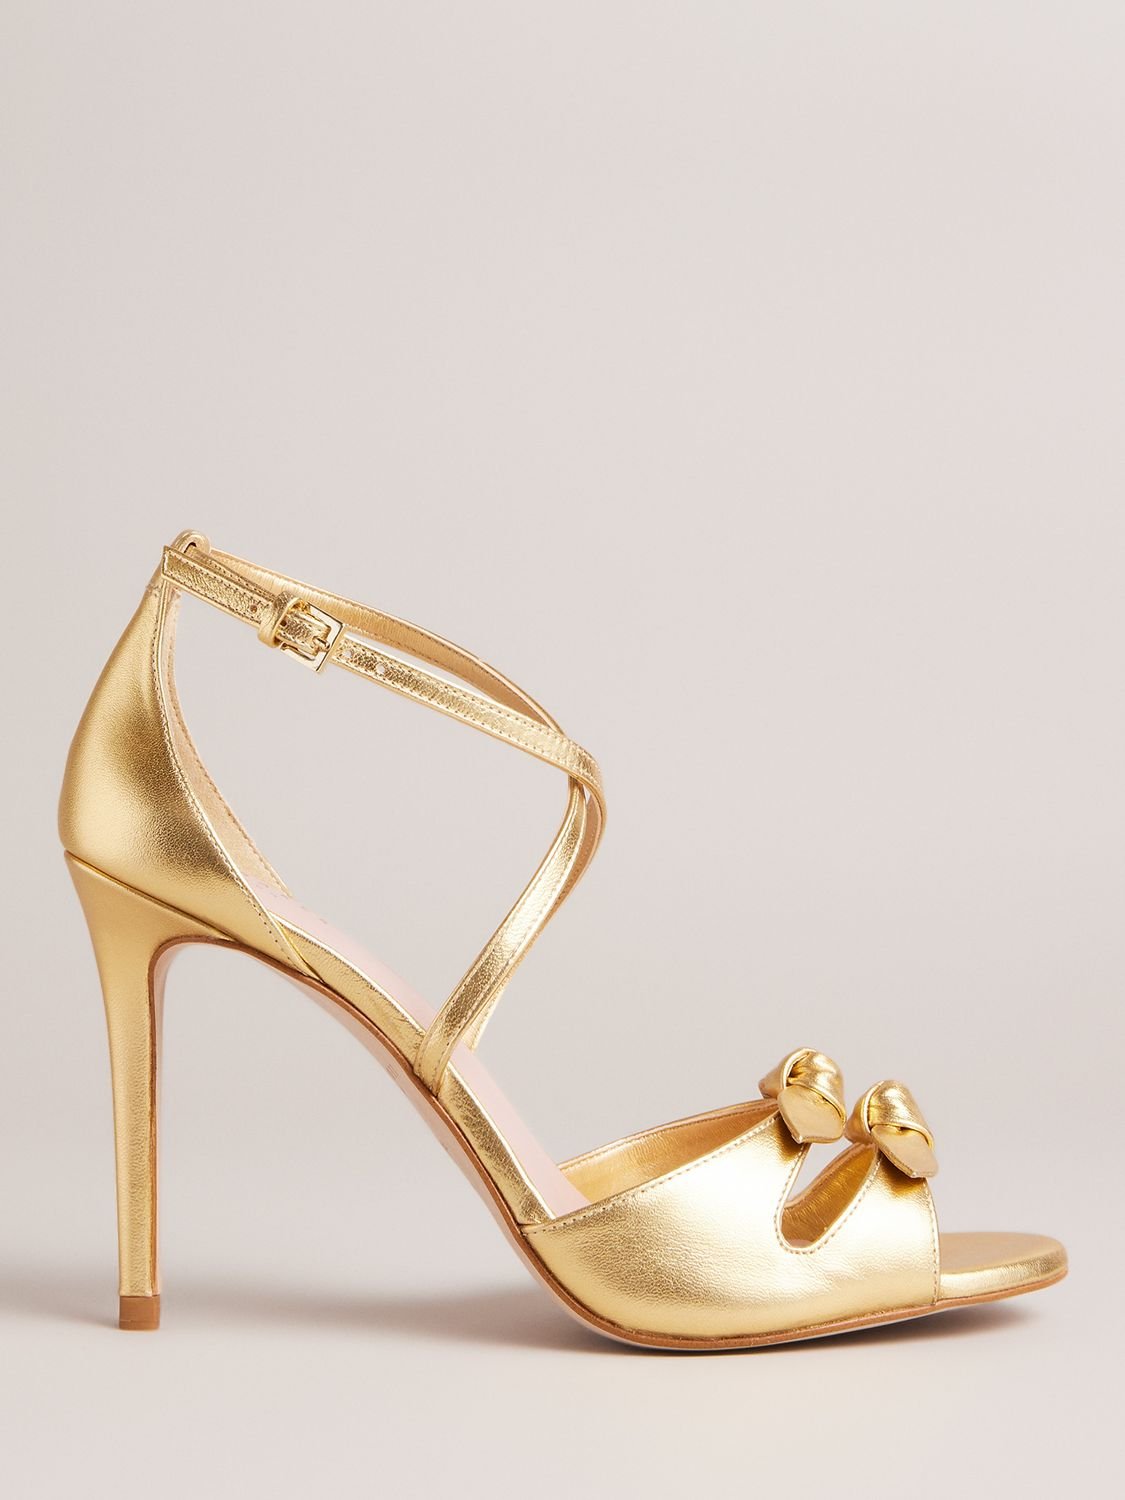 TED BAKER Bicci Bow Stiletto Heel Sandals in Gold | Endource